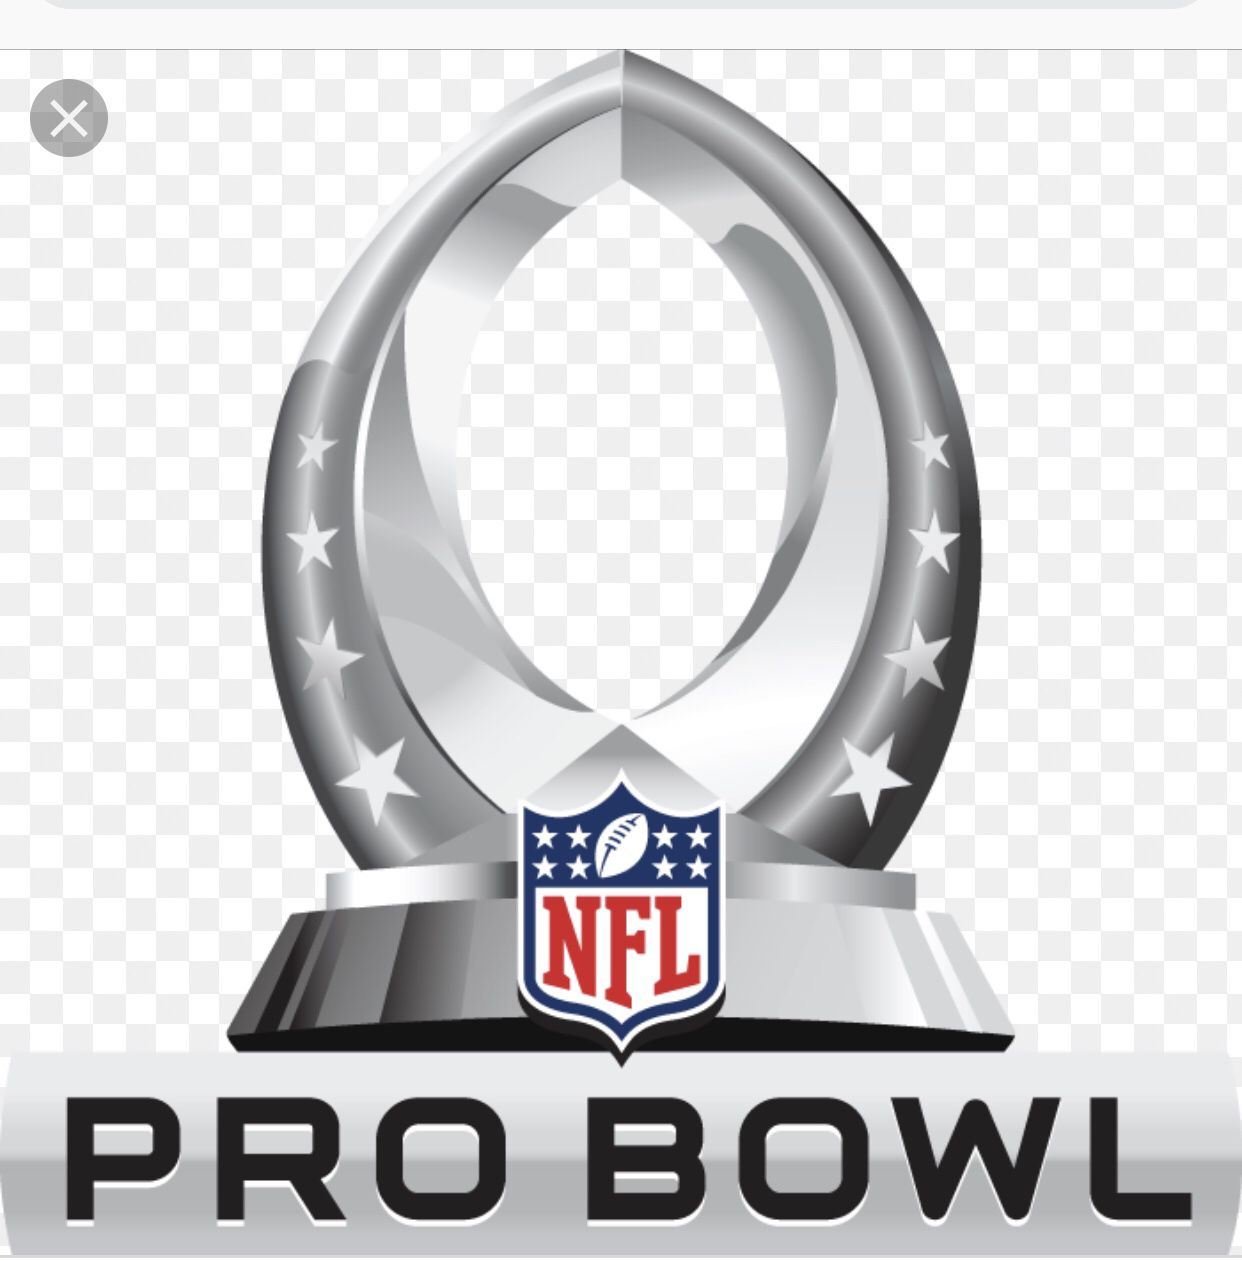 1 Pro Bowl 2019 Ticket Section 136 Row N $75